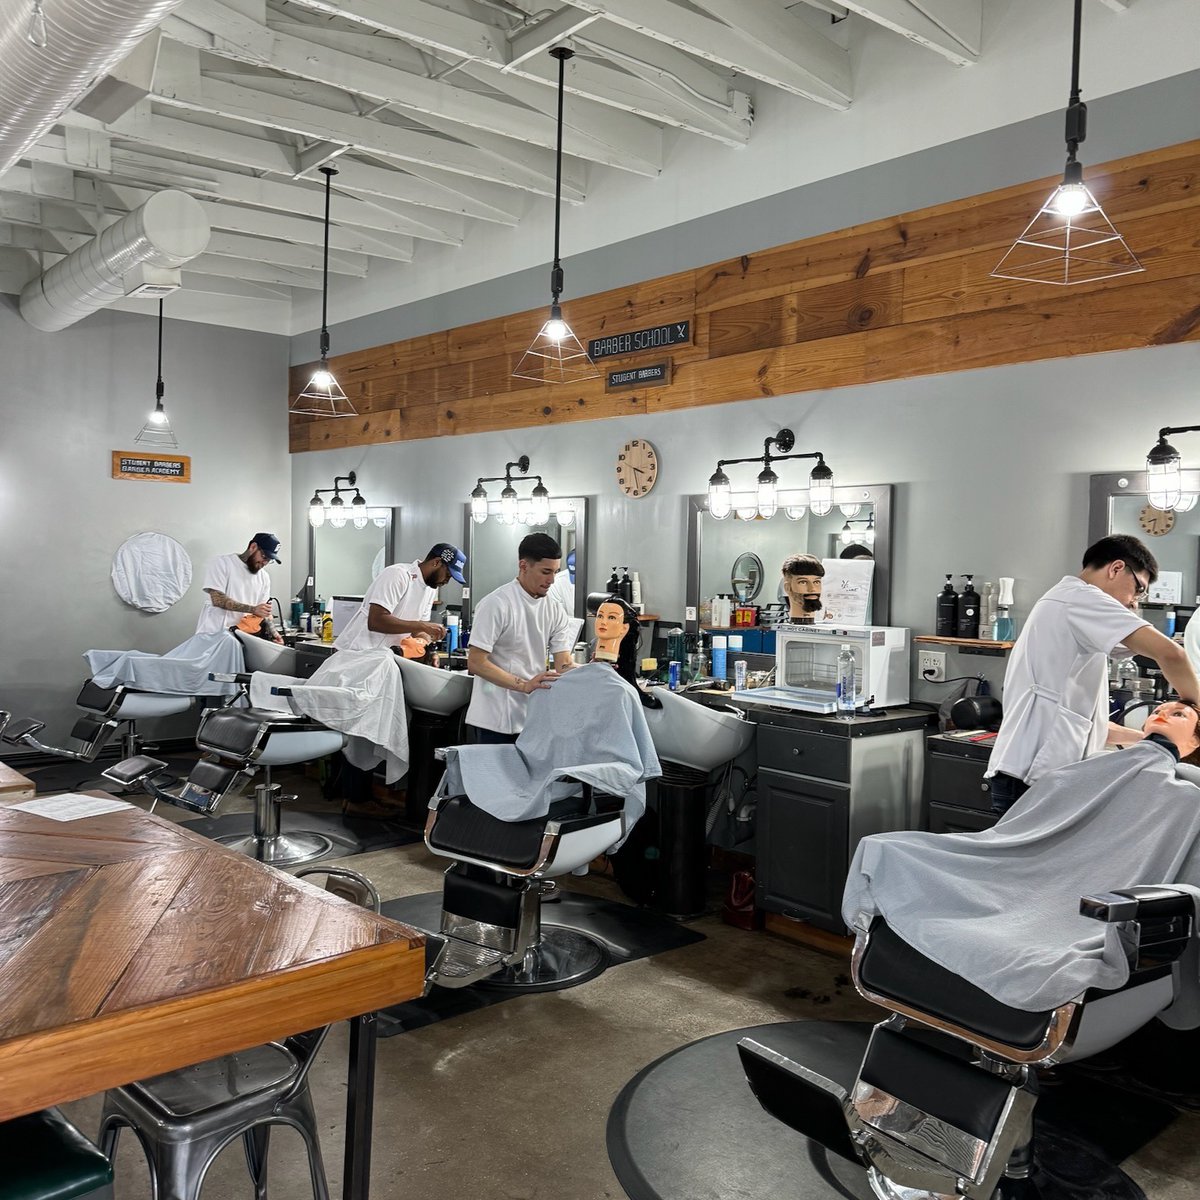 We’re here to make a better YOU!

#sharpfade #barberconnect #fadehaircut #mensfashion #haircuts #barberstyle #hairdresser #menstyle #haircolor #faded #barbero #barberpost #fadegame #taper #beauty #barbeiro #fades #wahlpro #men #barbersince #barberhub #love #waves